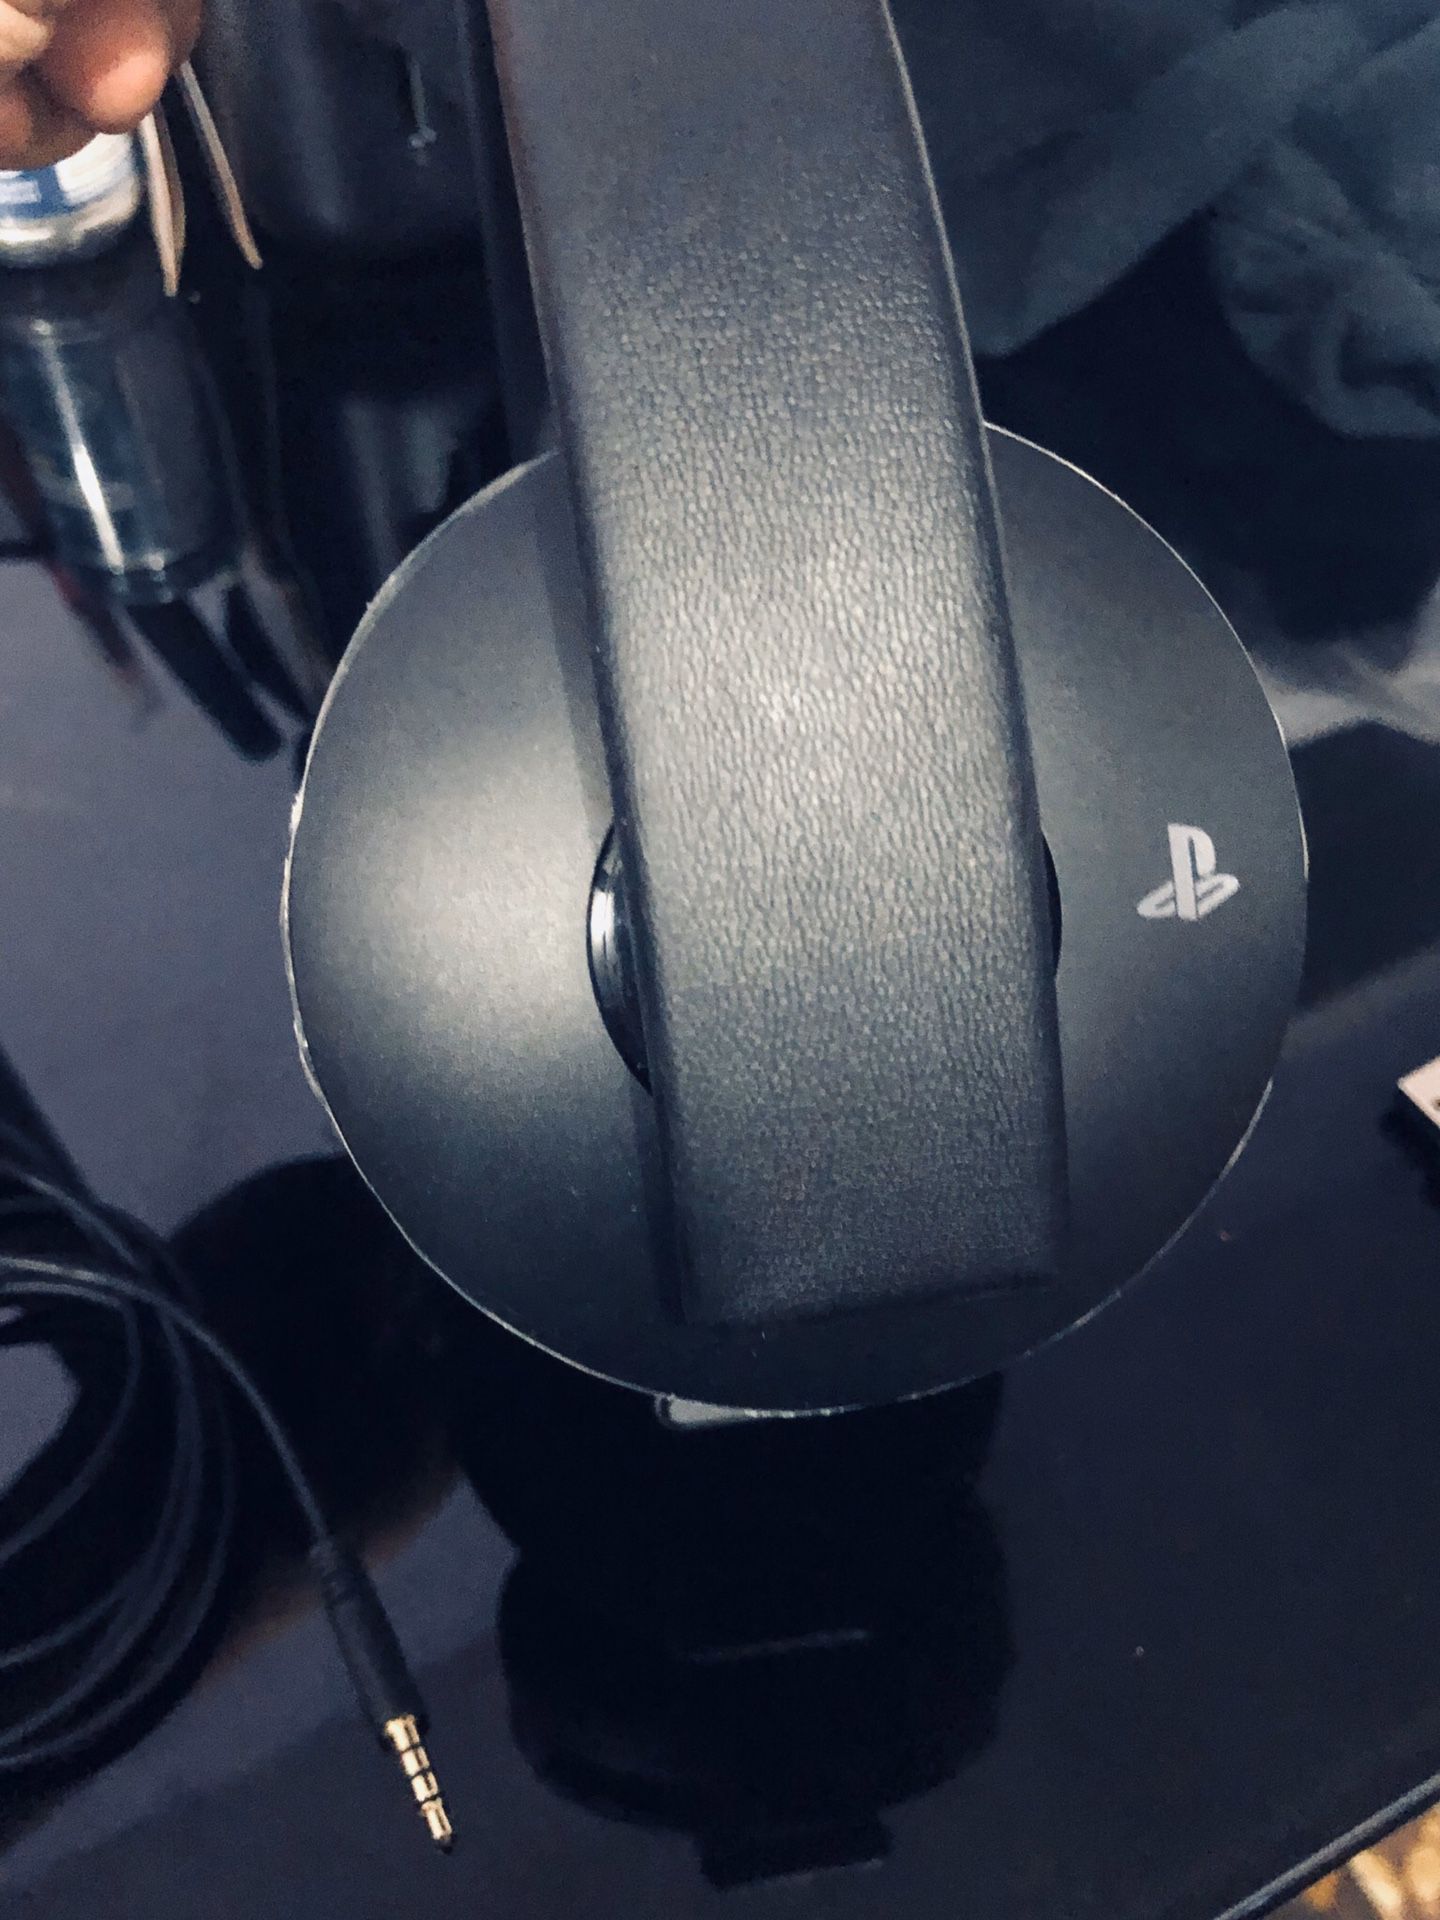 Sony PS4 Headset with aux cable and wireless Bluetooth USB